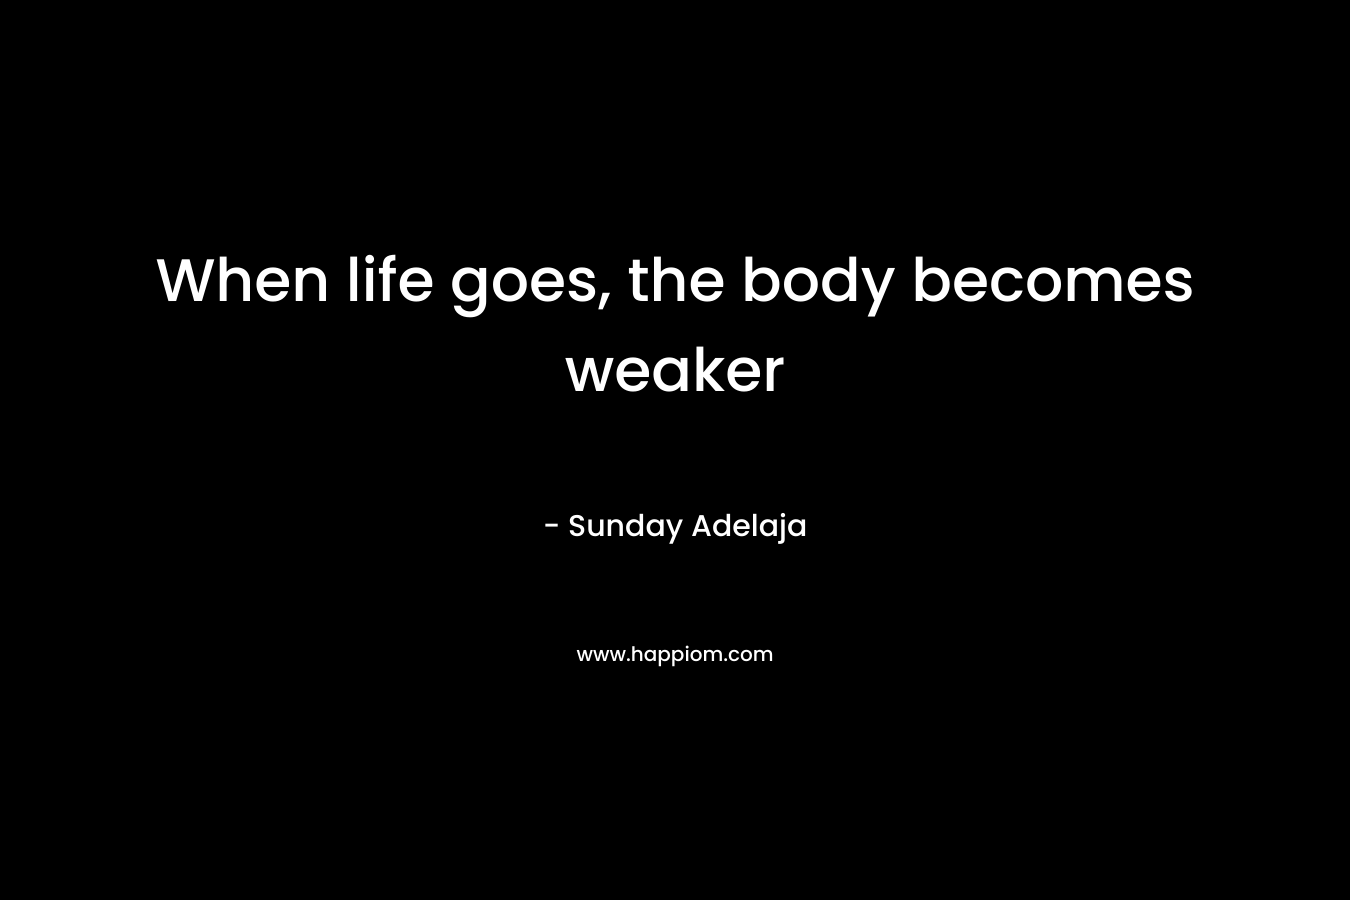 When life goes, the body becomes weaker